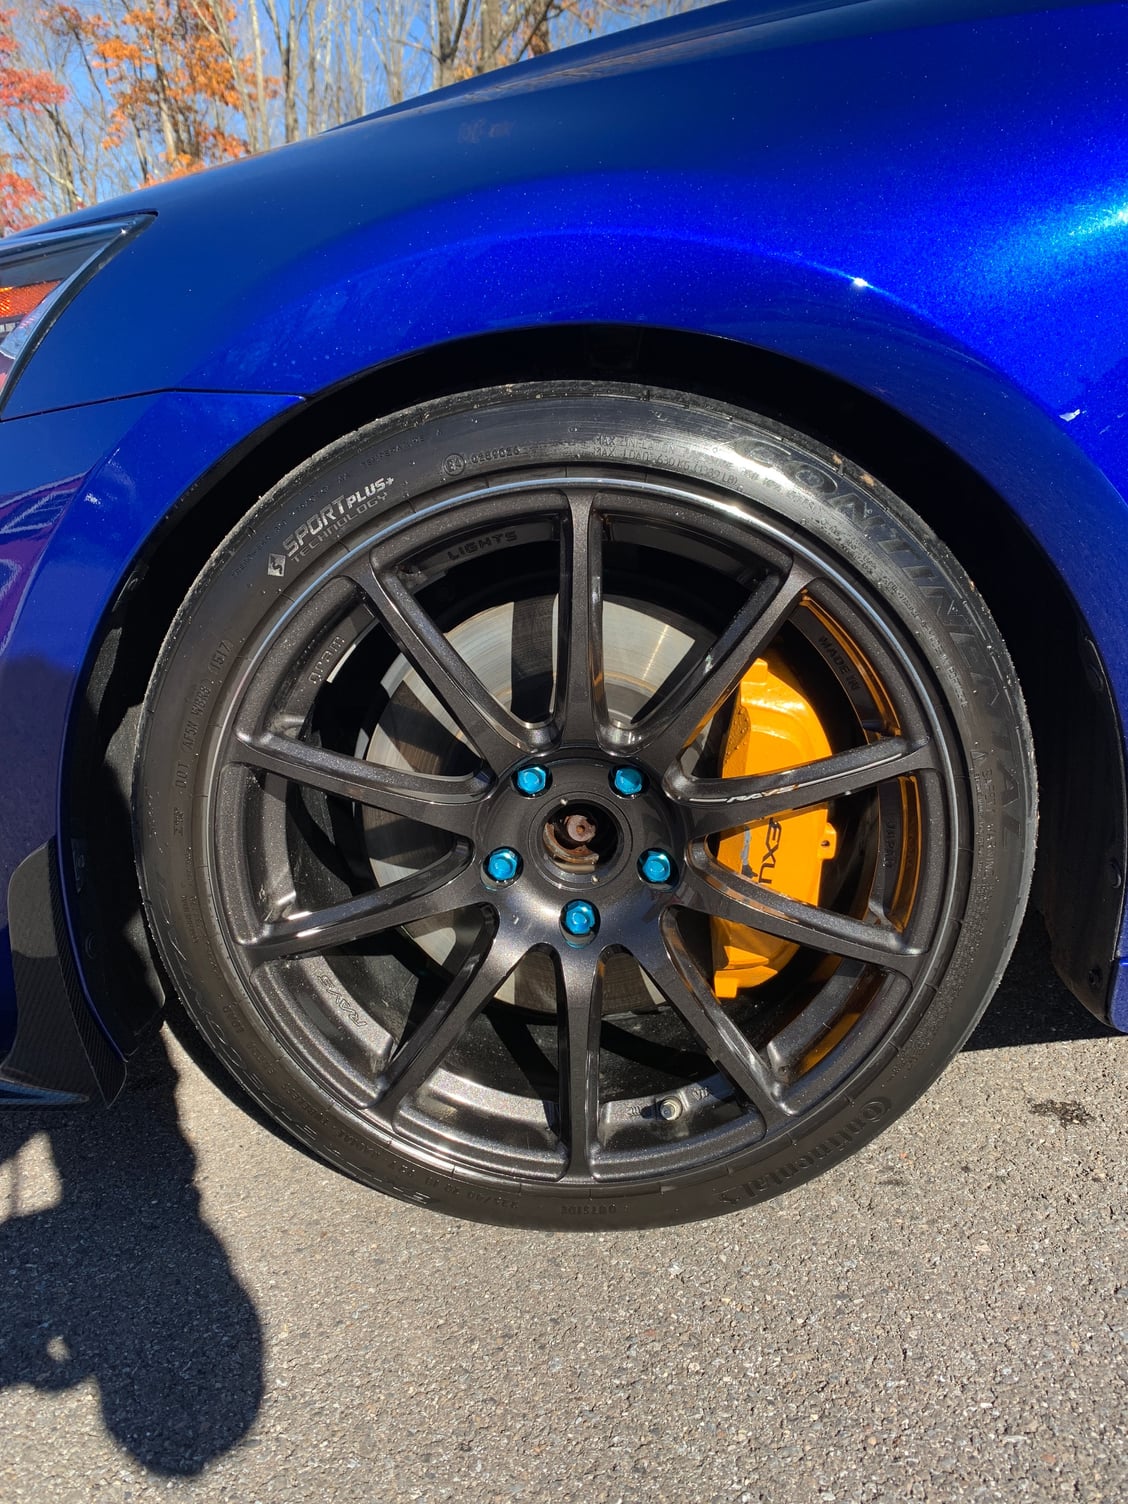 Wheels and Tires/Axles - Rays 57transcend wheels - Used - 2014 to 2019 Lexus IS350 - Clinton, NJ 08809, United States